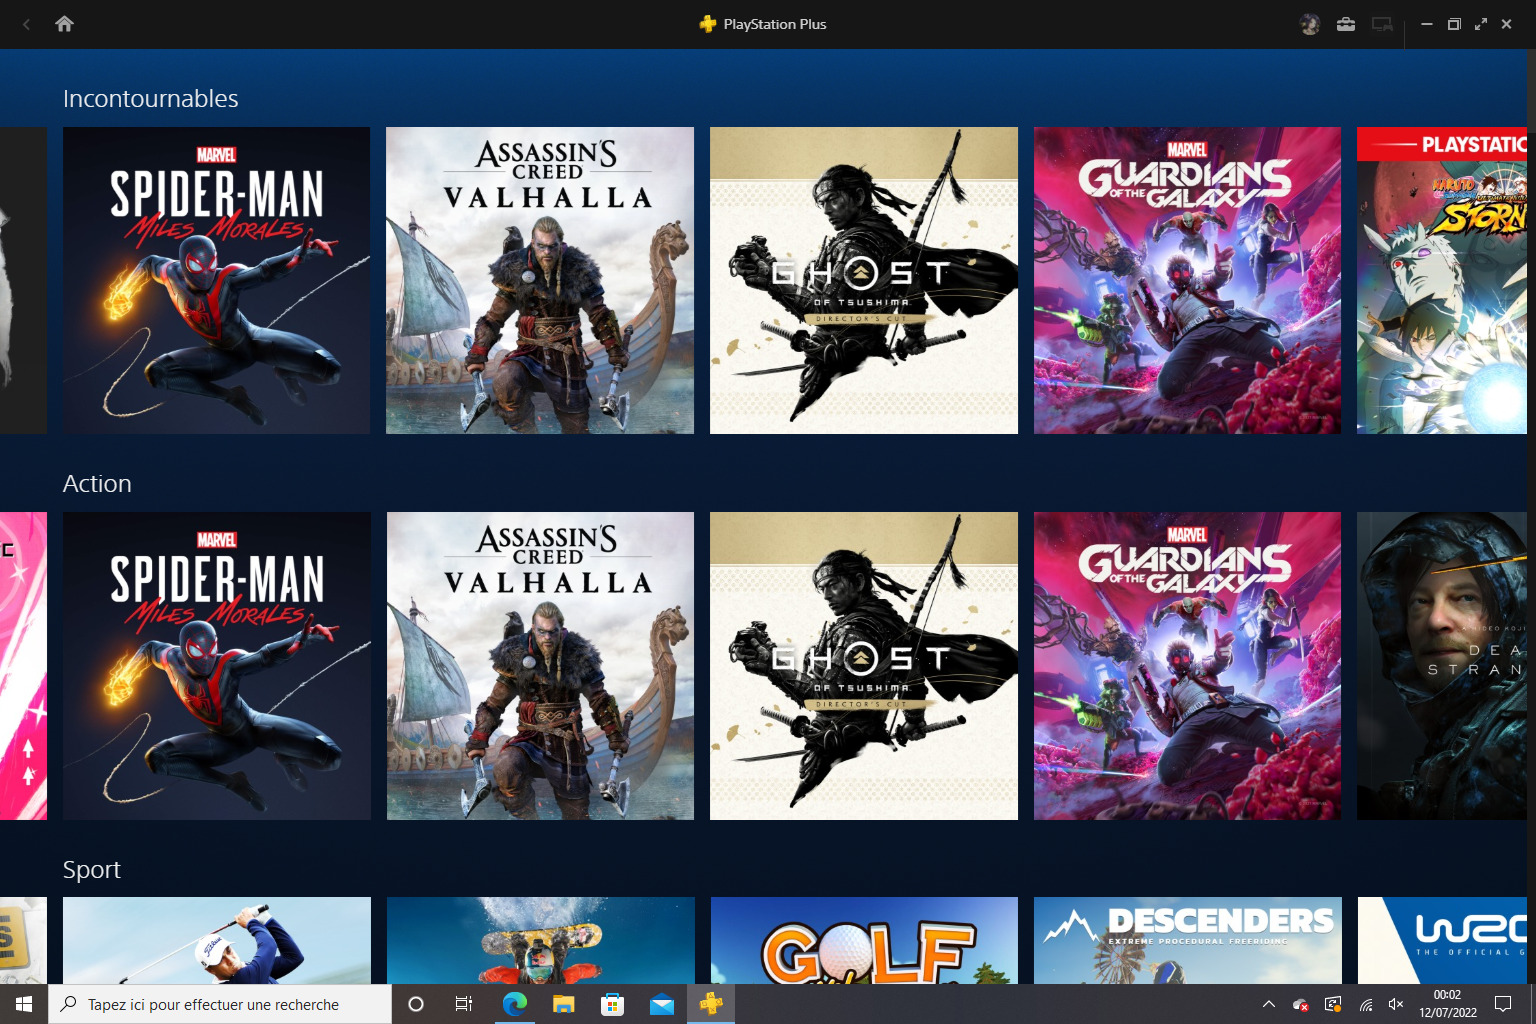 How to Play PS Plus Premium Games on Your PC - CNET